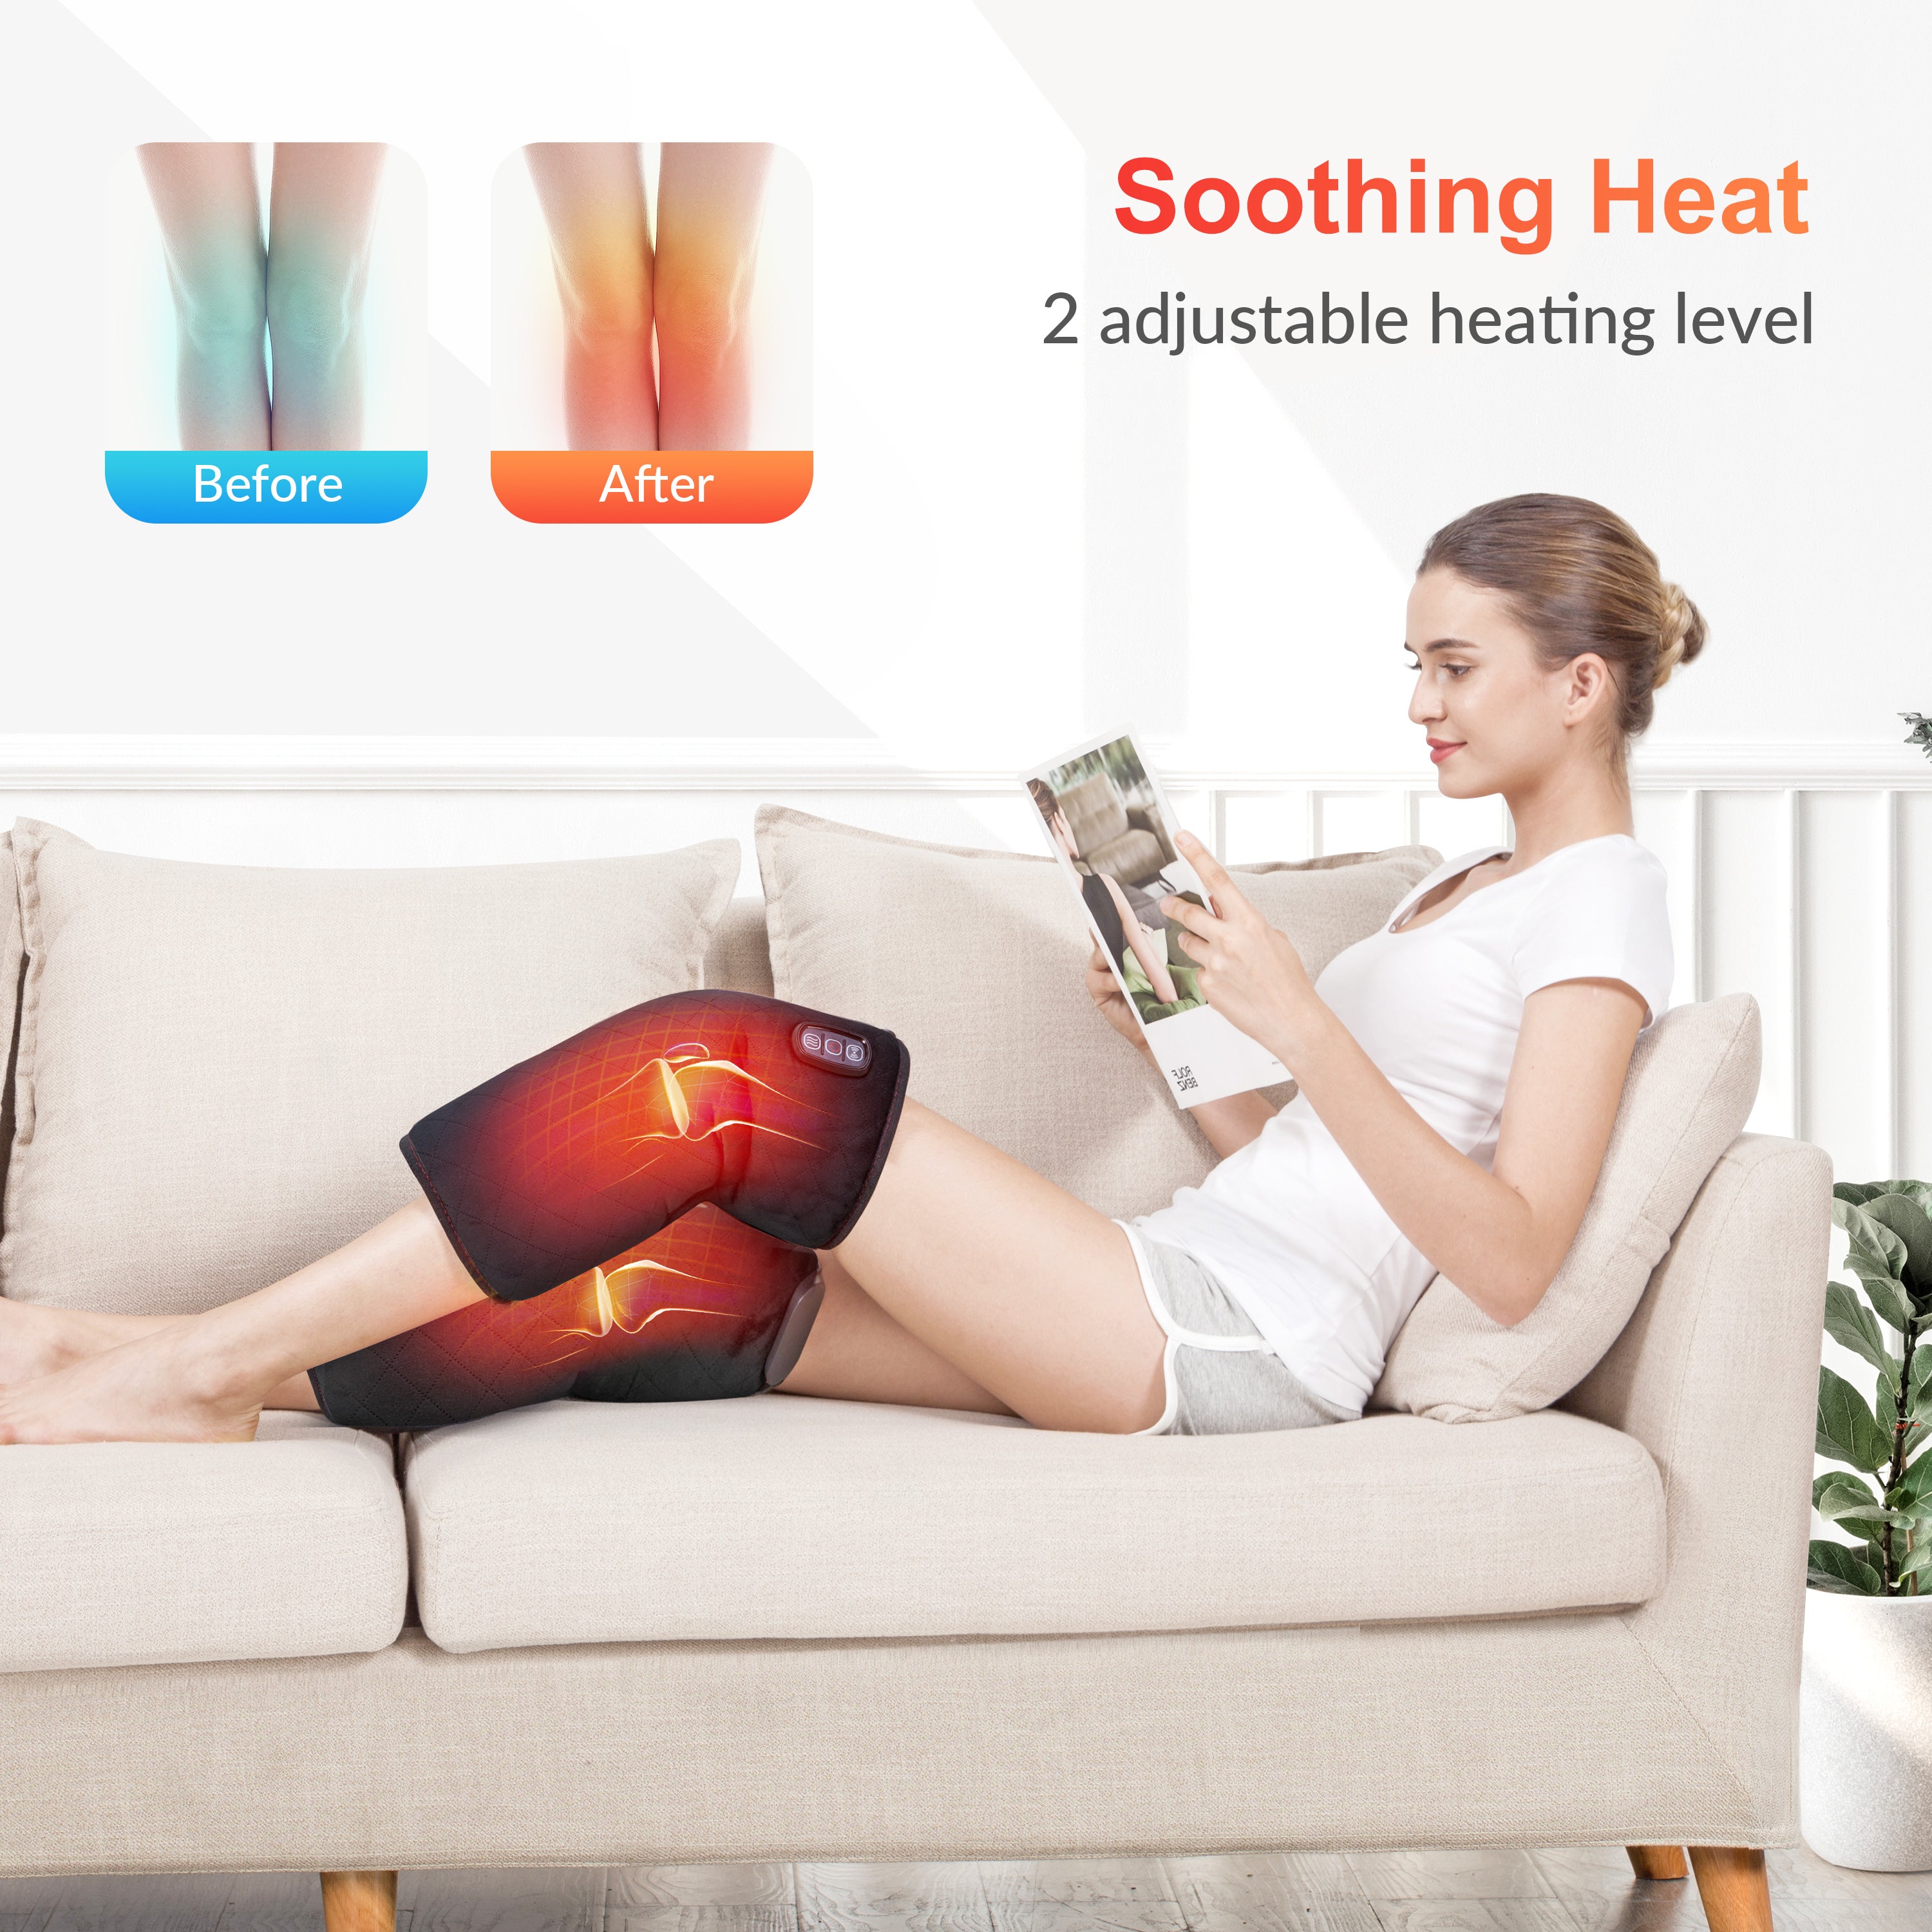 Comfier Knee Massager with Heat, Vibration Heating Pad for Knee, Knee Heating Pad for Relief, Leg Massager, Heated Knee Brace Wrap for Stress Relief